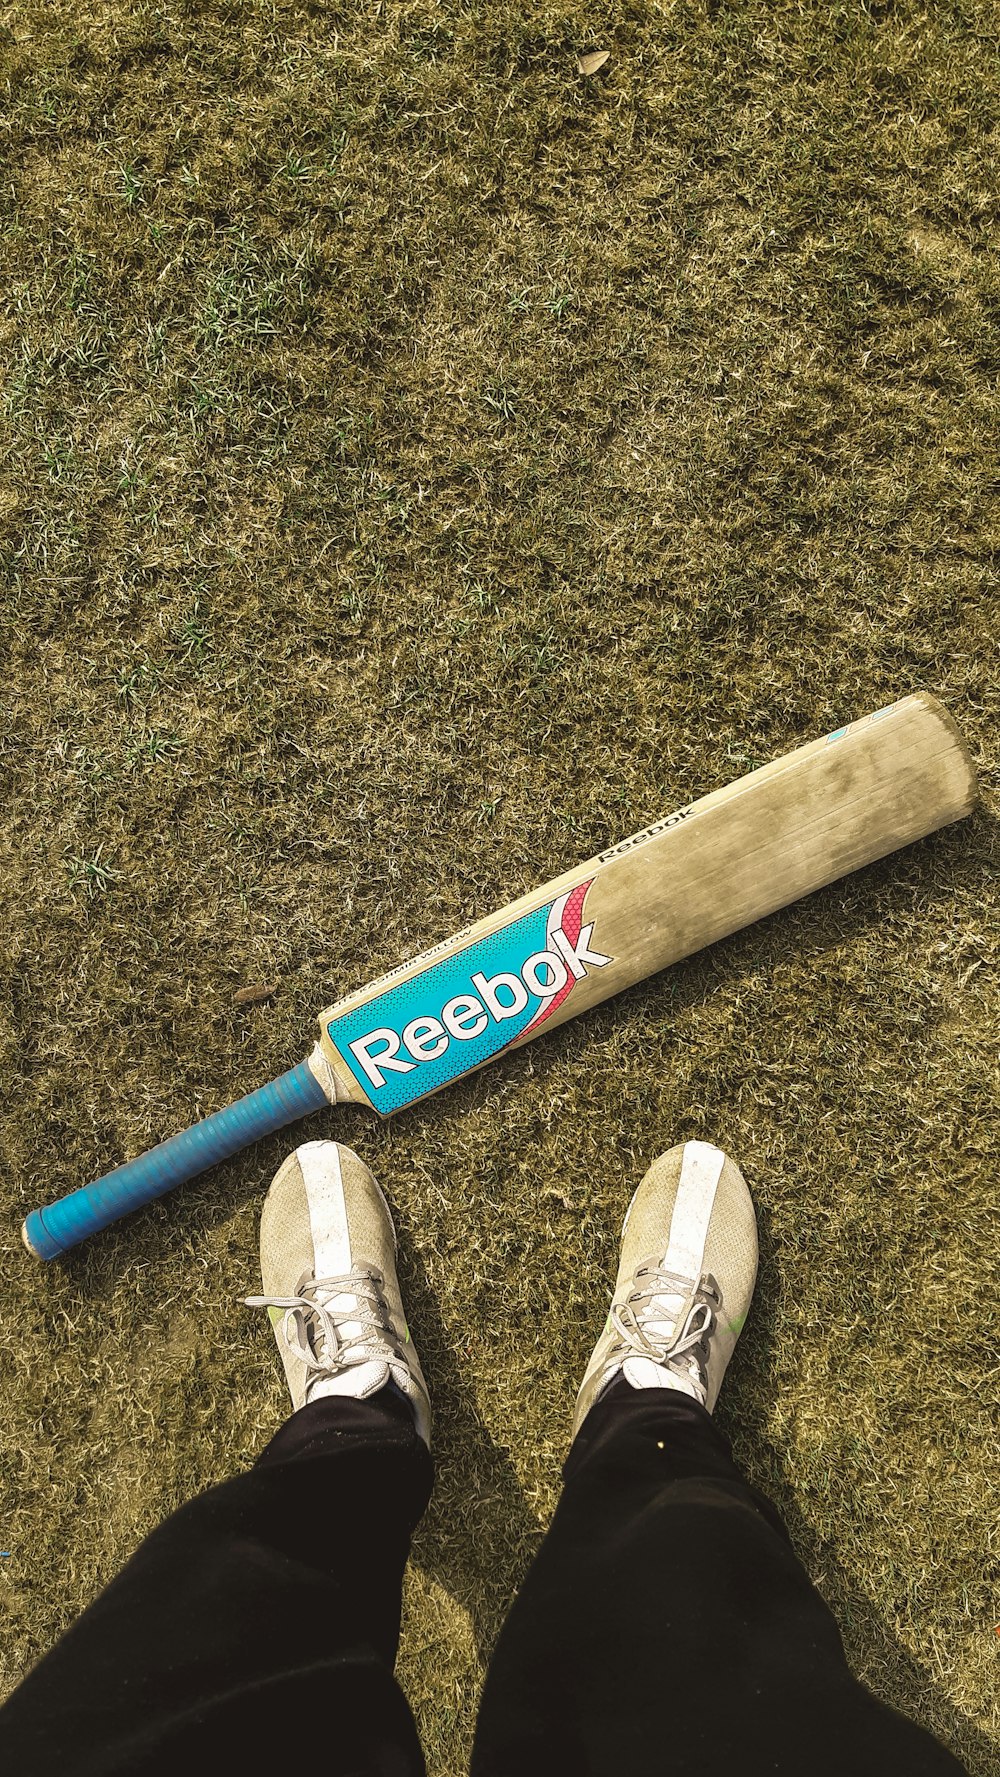 a baseball bat laying on the ground next to a person's feet